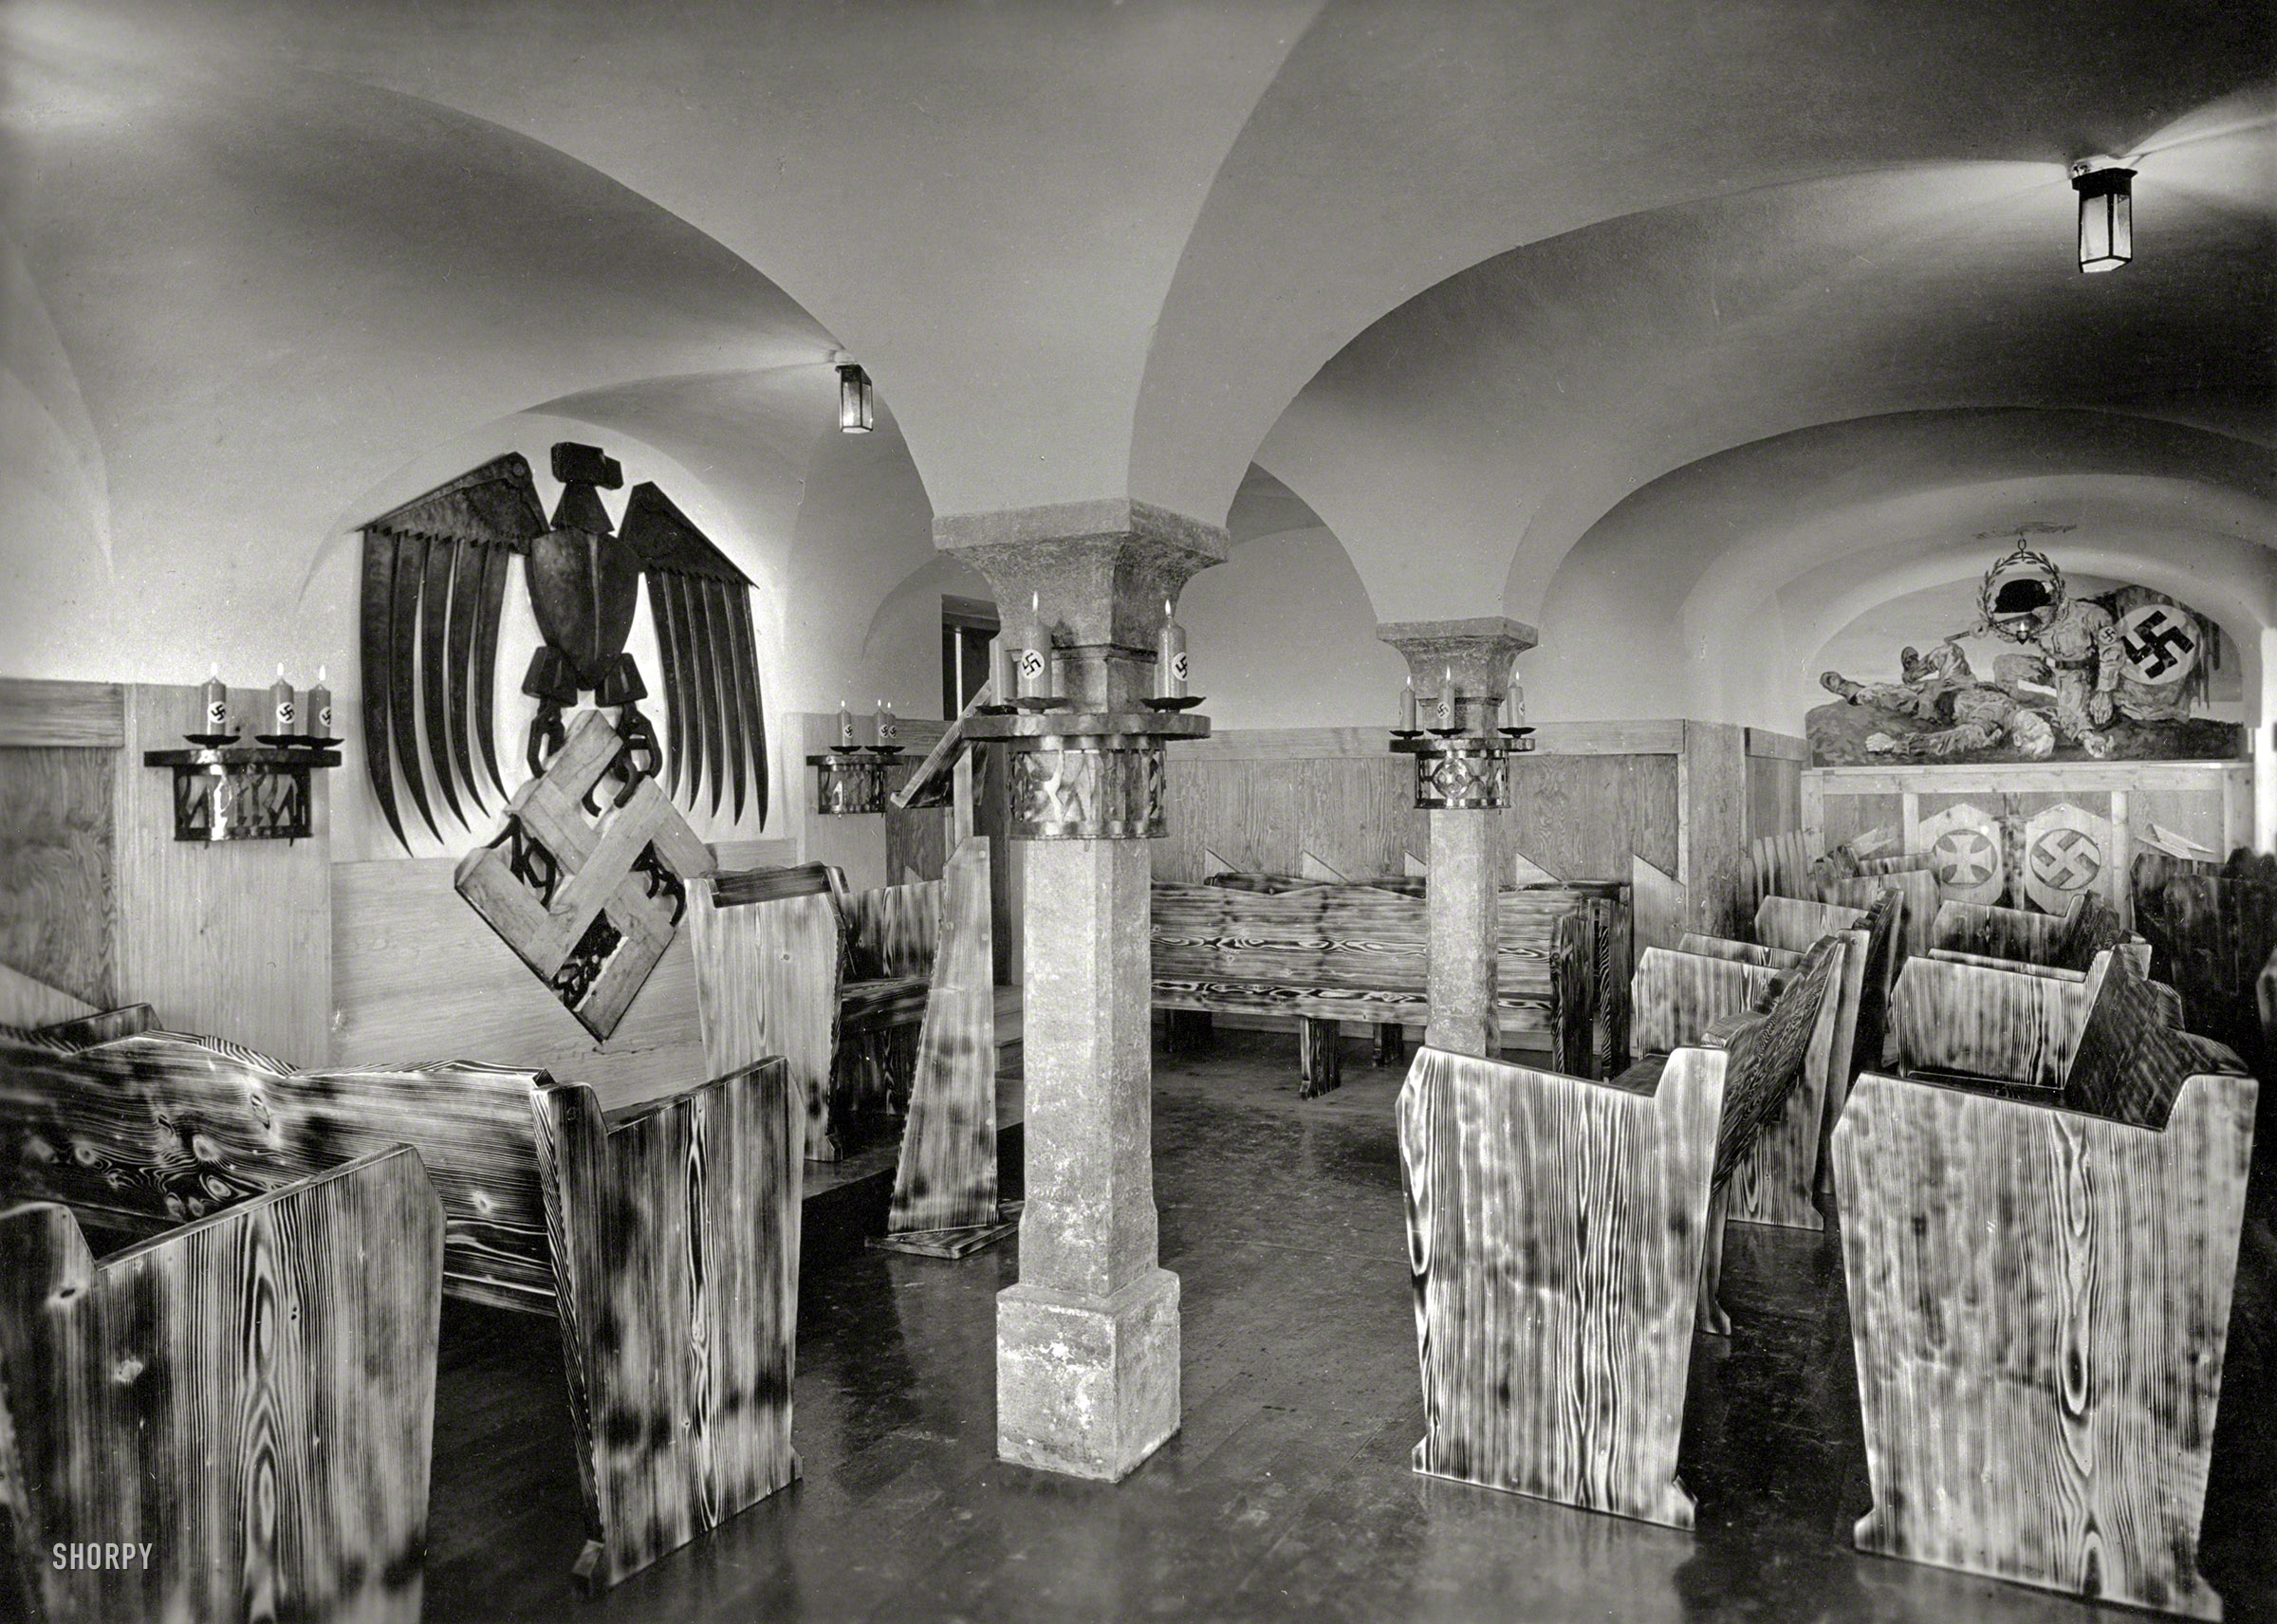 Germany circa 1938. "Meeting room of Nazi Party facility in Upper Bavaria." The swastika candles lend a rustic note. This looks like something out of a comic book or movie serial, but it was all too real. Photo-Pfaller print. View full size.

Additional details on this photo, one of seven pictures in a portfolio that's part of the Third Reich Collection at the Library of Congress:

One portfolio (seven photographic prints); 13 x 18 cm. Photographs on mounts 23 x 29 cm. No captions. Ink stamp on back of mounts: "Photo-Pfaller, Traunstein/Obb. Tel. 451." Confiscated by U.S. military intelligence authorities, 1945-1946. Transfer; 1947. Photographs show a chapel (?) in a Nazi party house in Bavaria. Includes wooden carved benches and podium; elaborate Nazi eagle and swastika symbol made of wood; mural of fallen soldier and SA companion; light fixture incorporating a helmet. Also includes exterior views of the house showing a mural with SA soldier with swastika flag and farmers with tools.